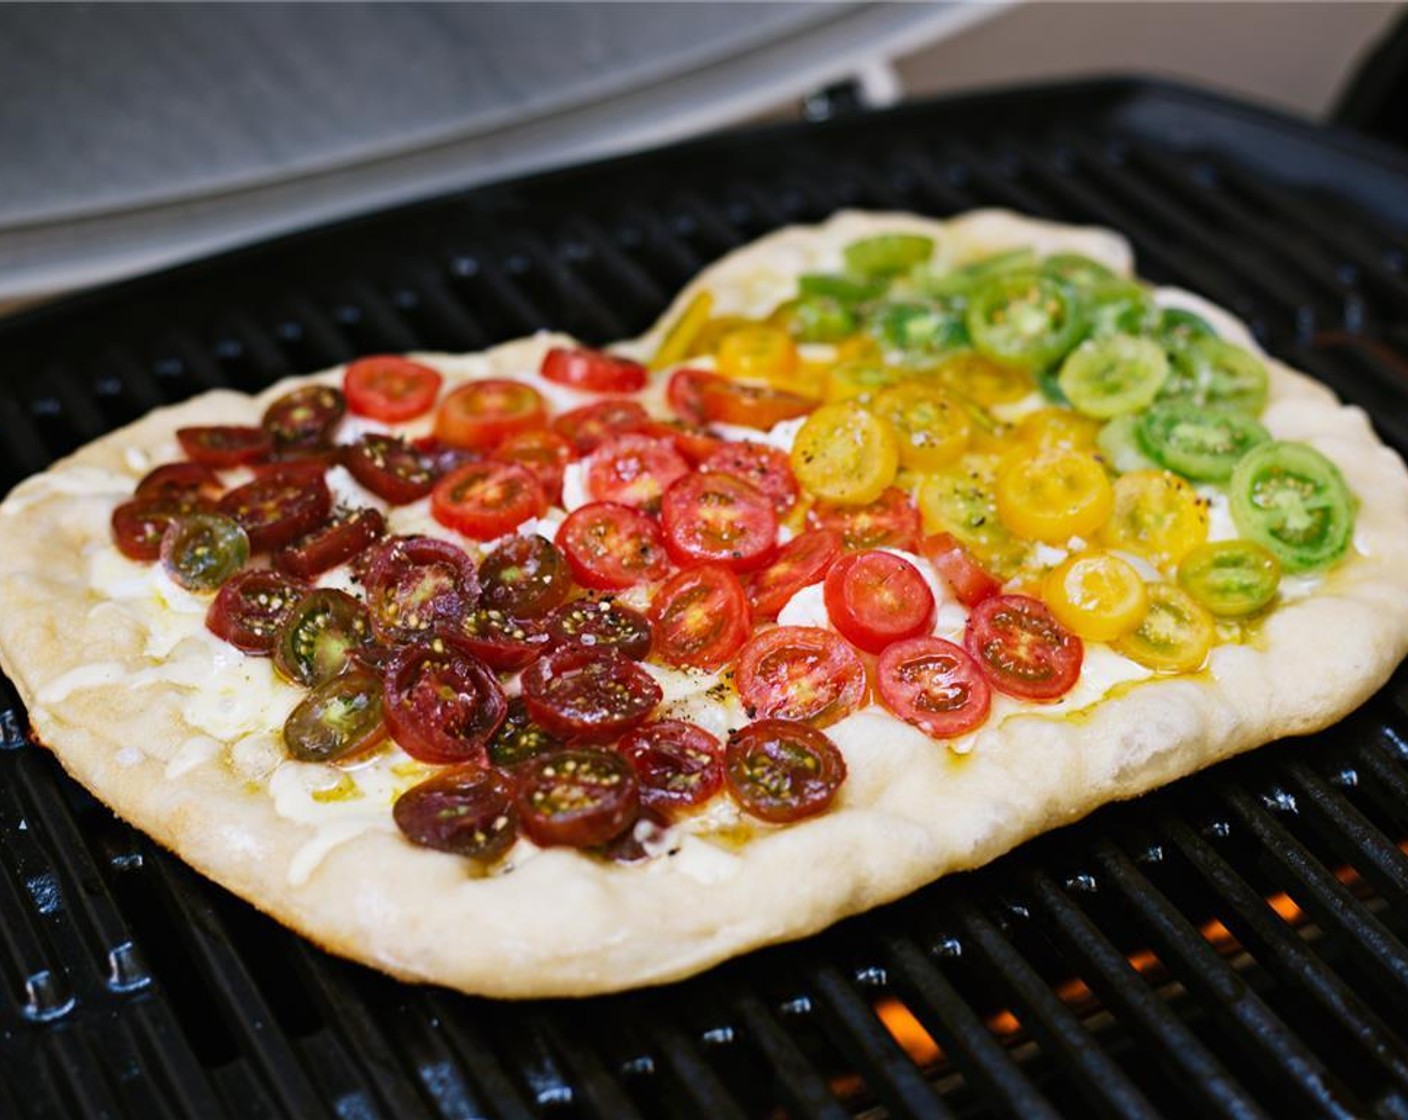 step 8 Layer Purple Grape Tomatoes (1 cup), Red Grape Tomatoes (1 cup), Yellow Grape Tomatoes (1 cup), and Green Grape Tomatoes (1 cup) onto the pizza in an ombre pattern.